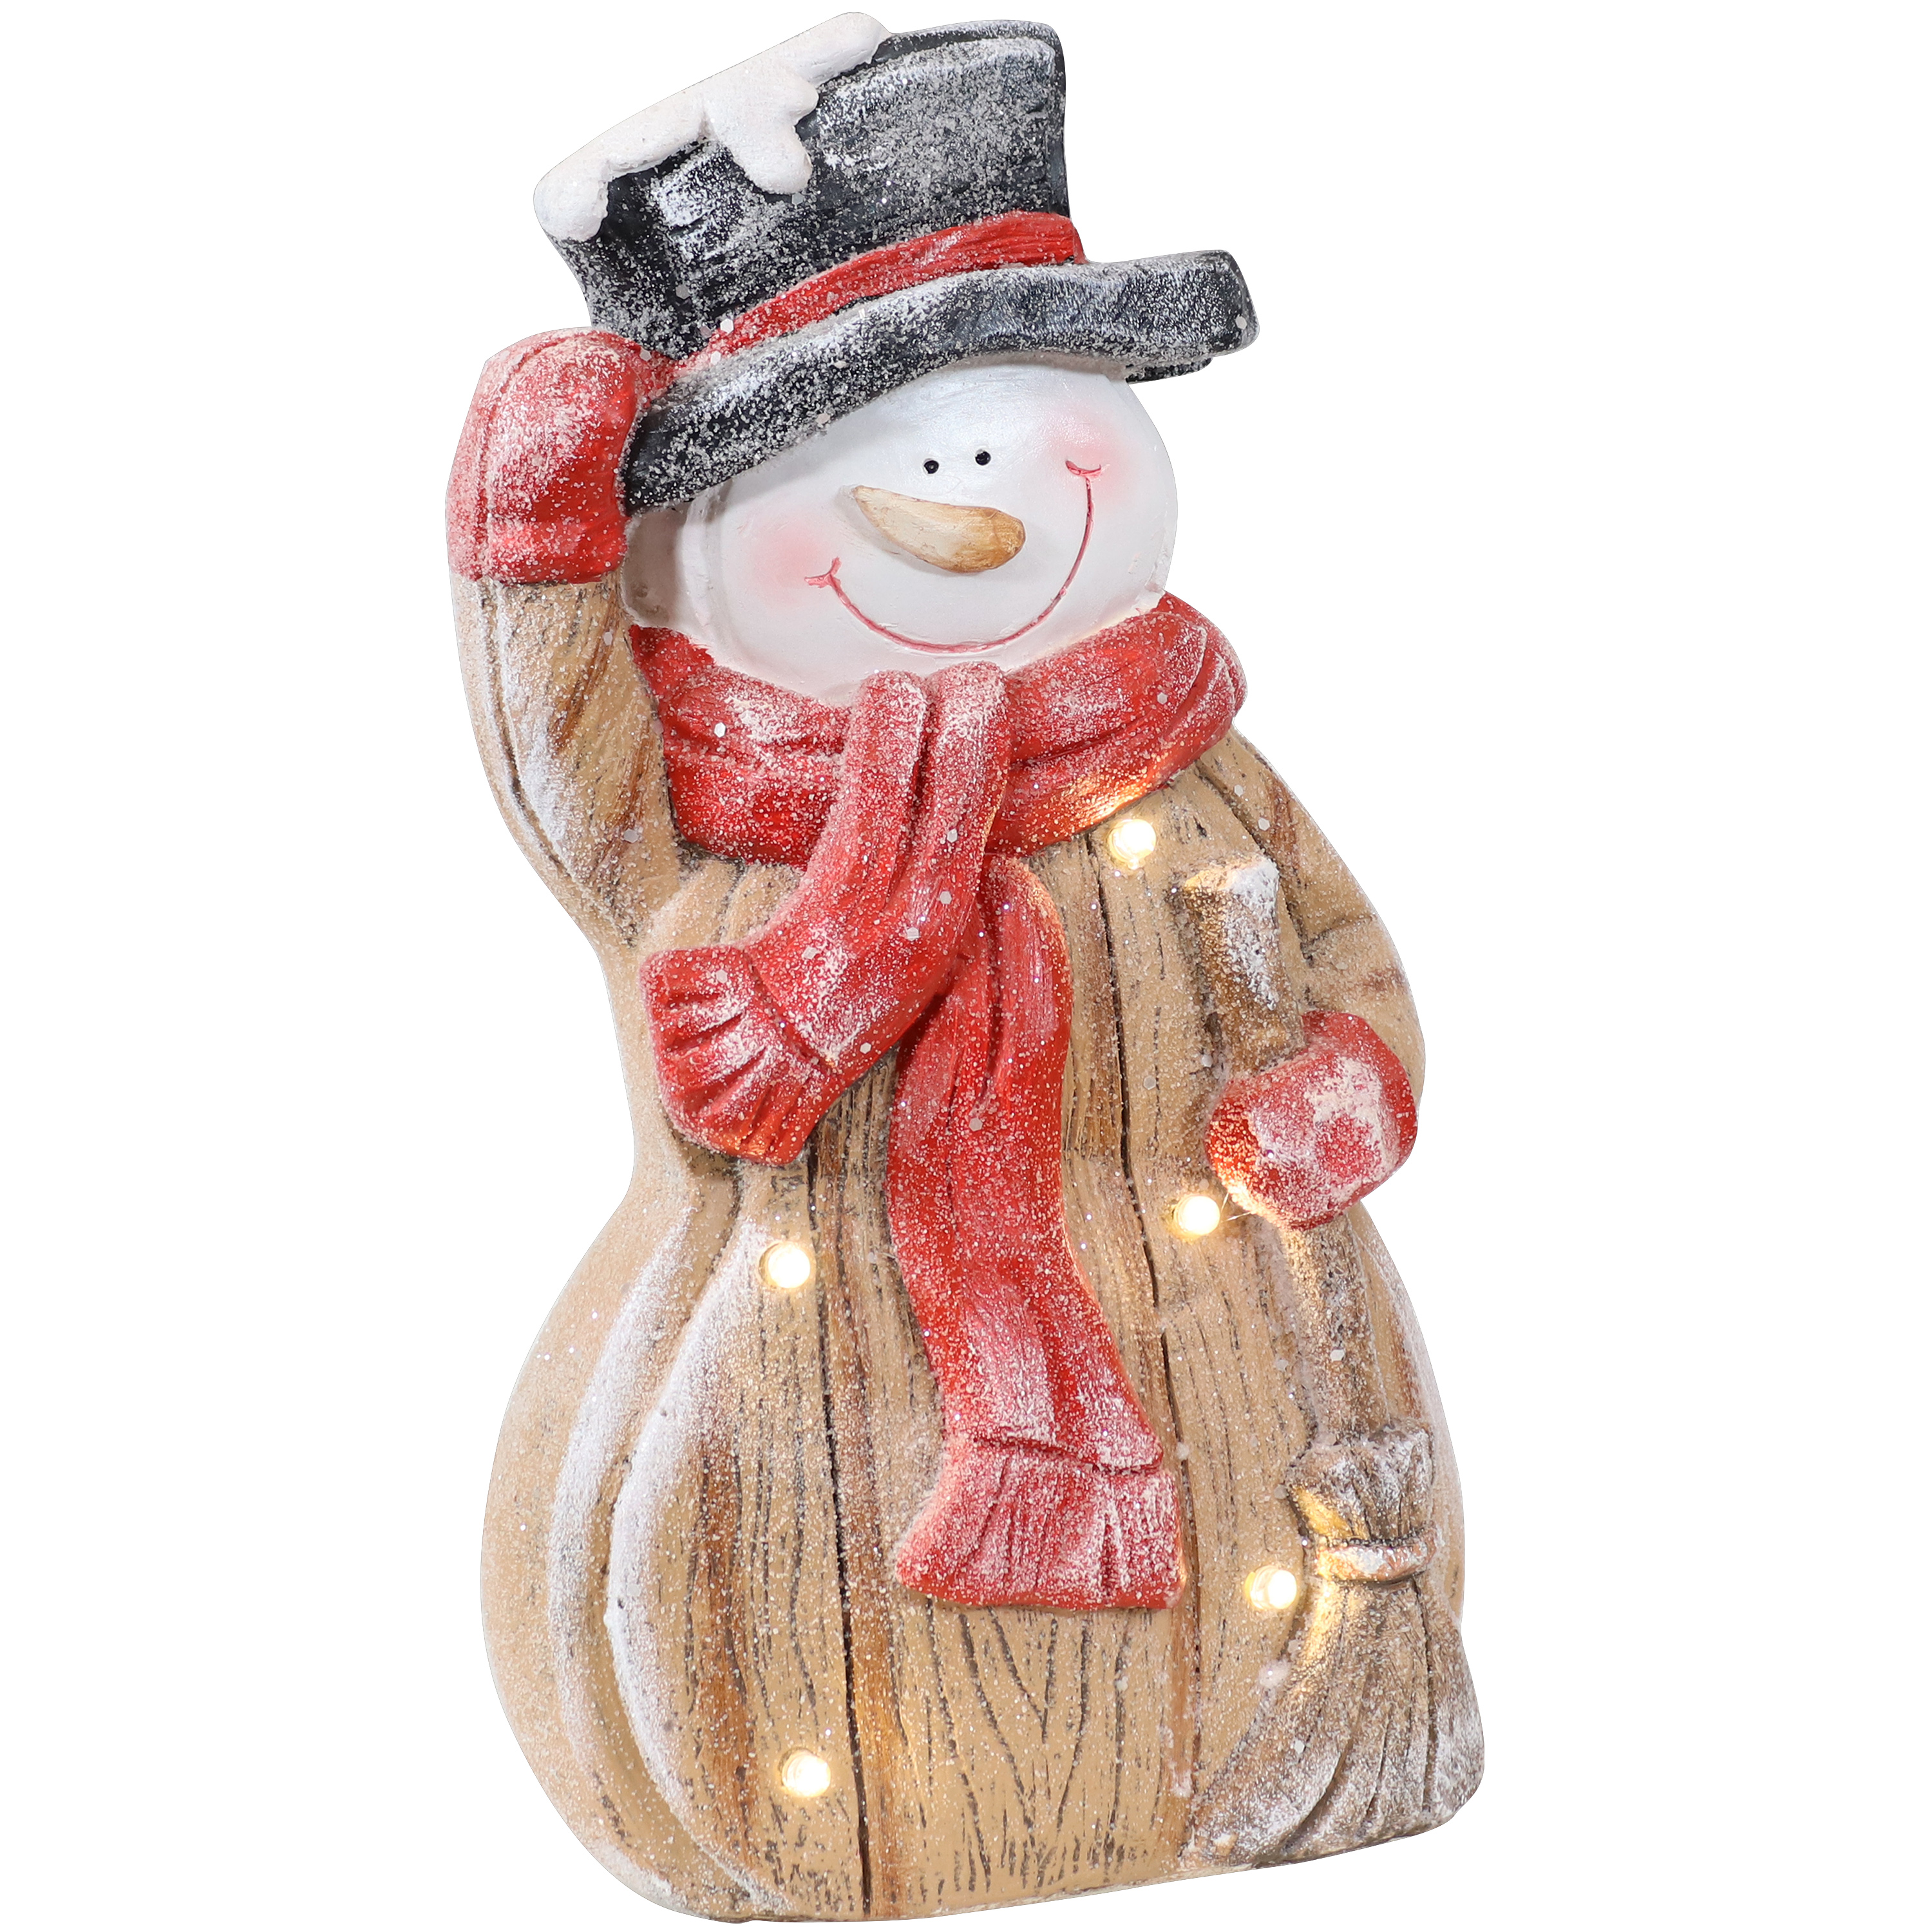 Harold the Happy Lighted Snowman Statue